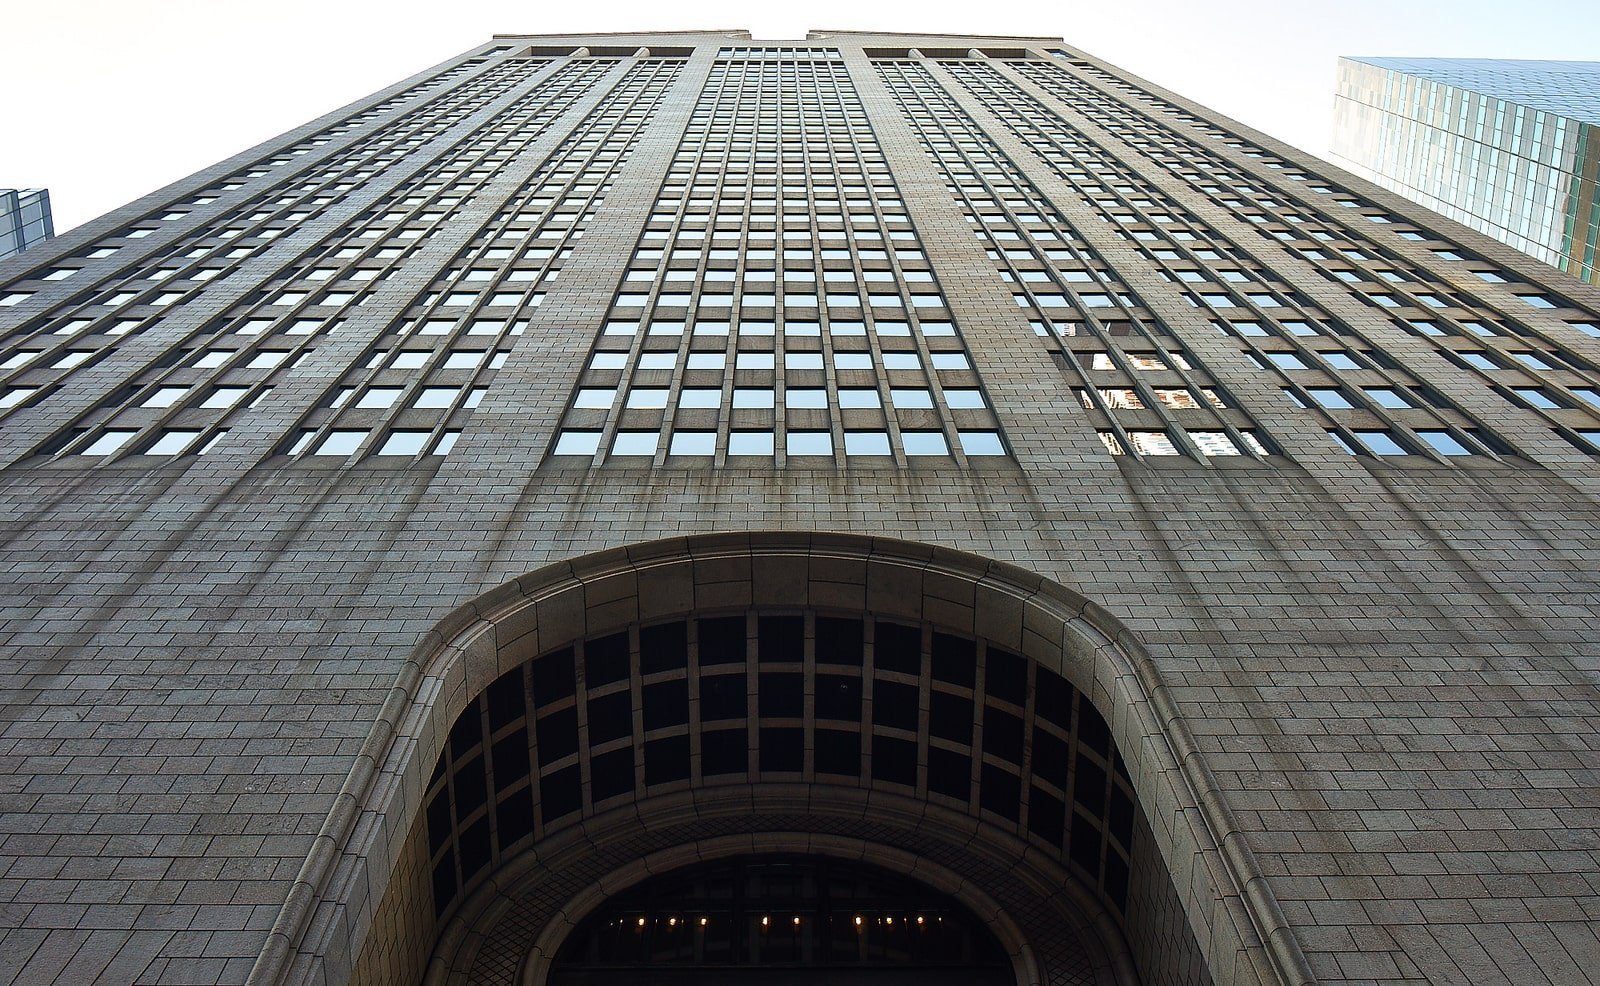 A famous skyscraper in new York city will lose its luxurious lobby